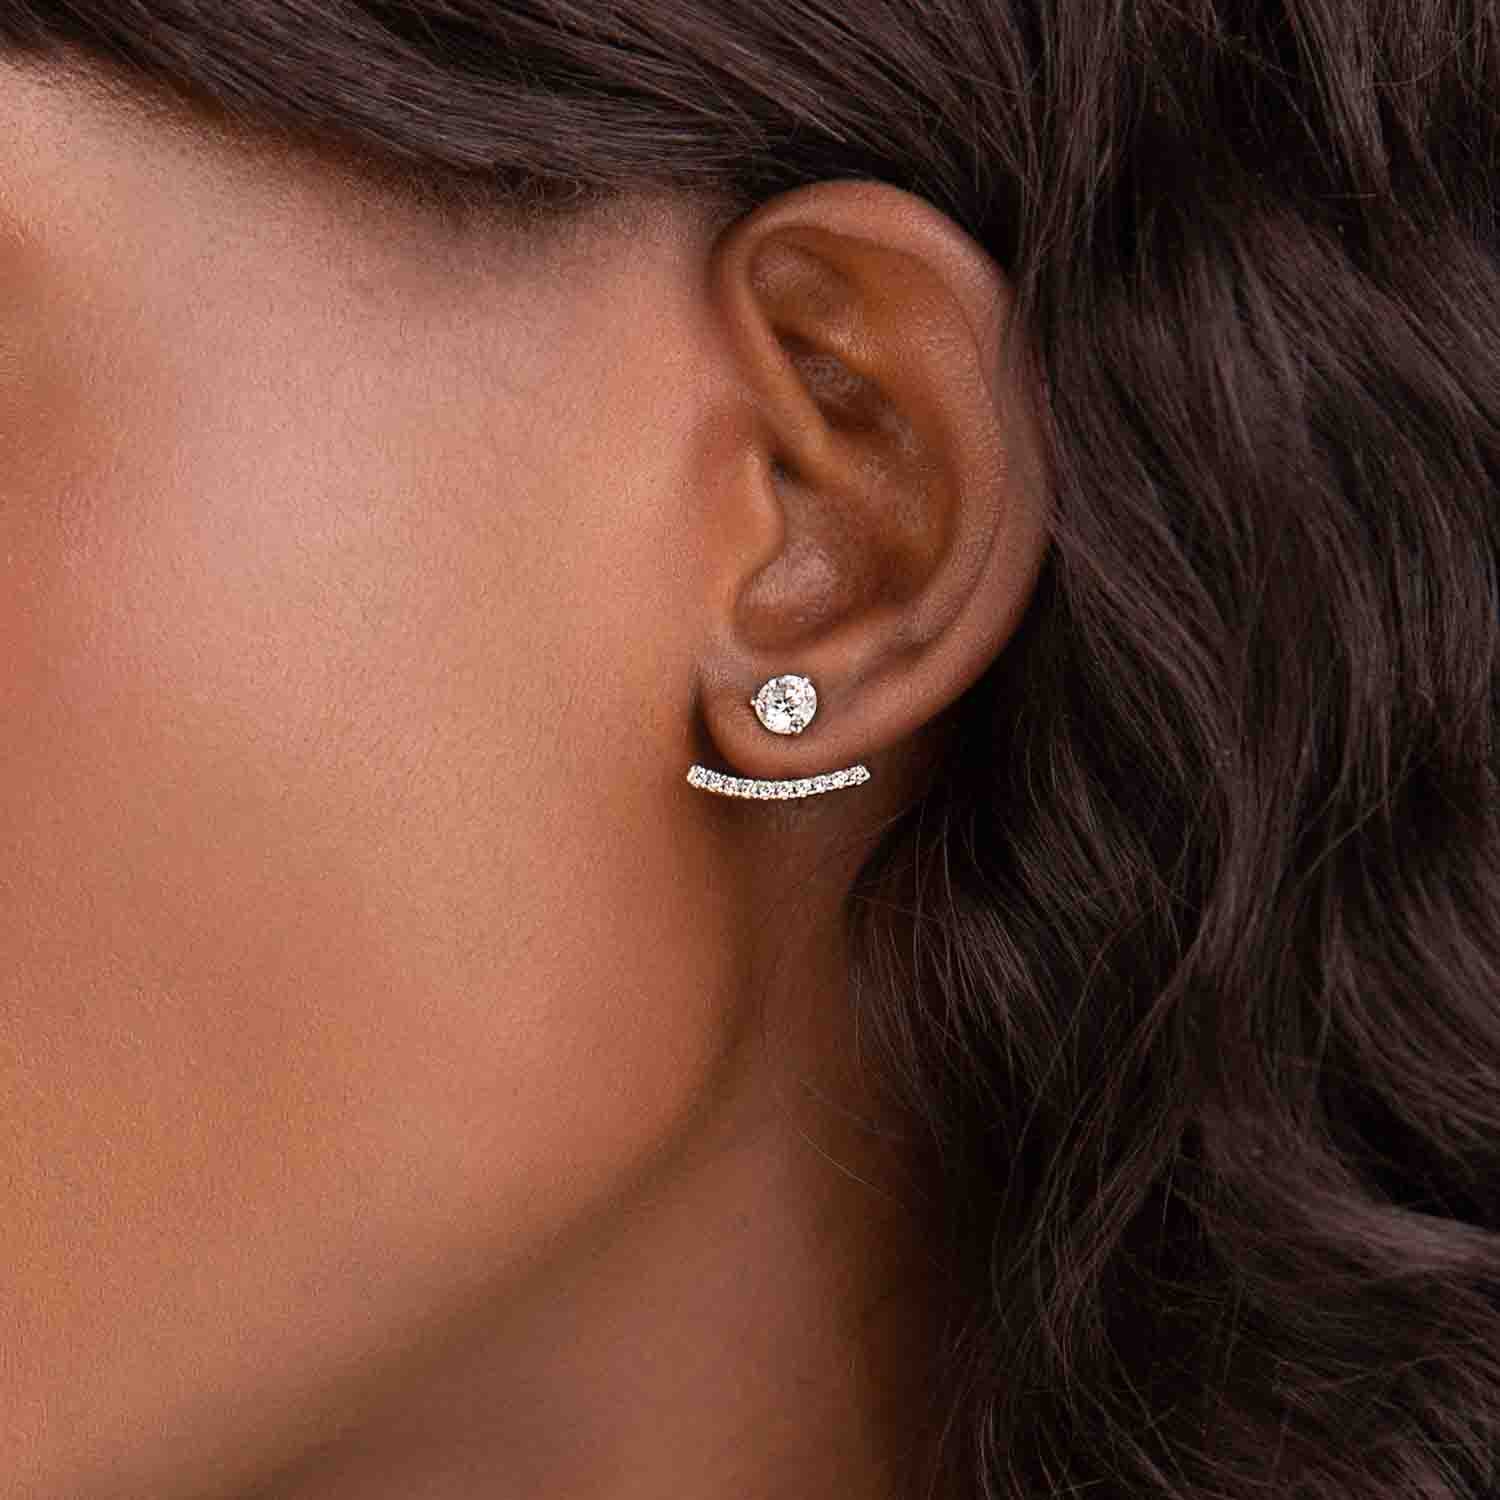 Curved Bar Earring Jackets set with 0.20ctw lab grown diamonds in 14K White Gold and shown with a pair of stud earrings that are not included in the purchase 